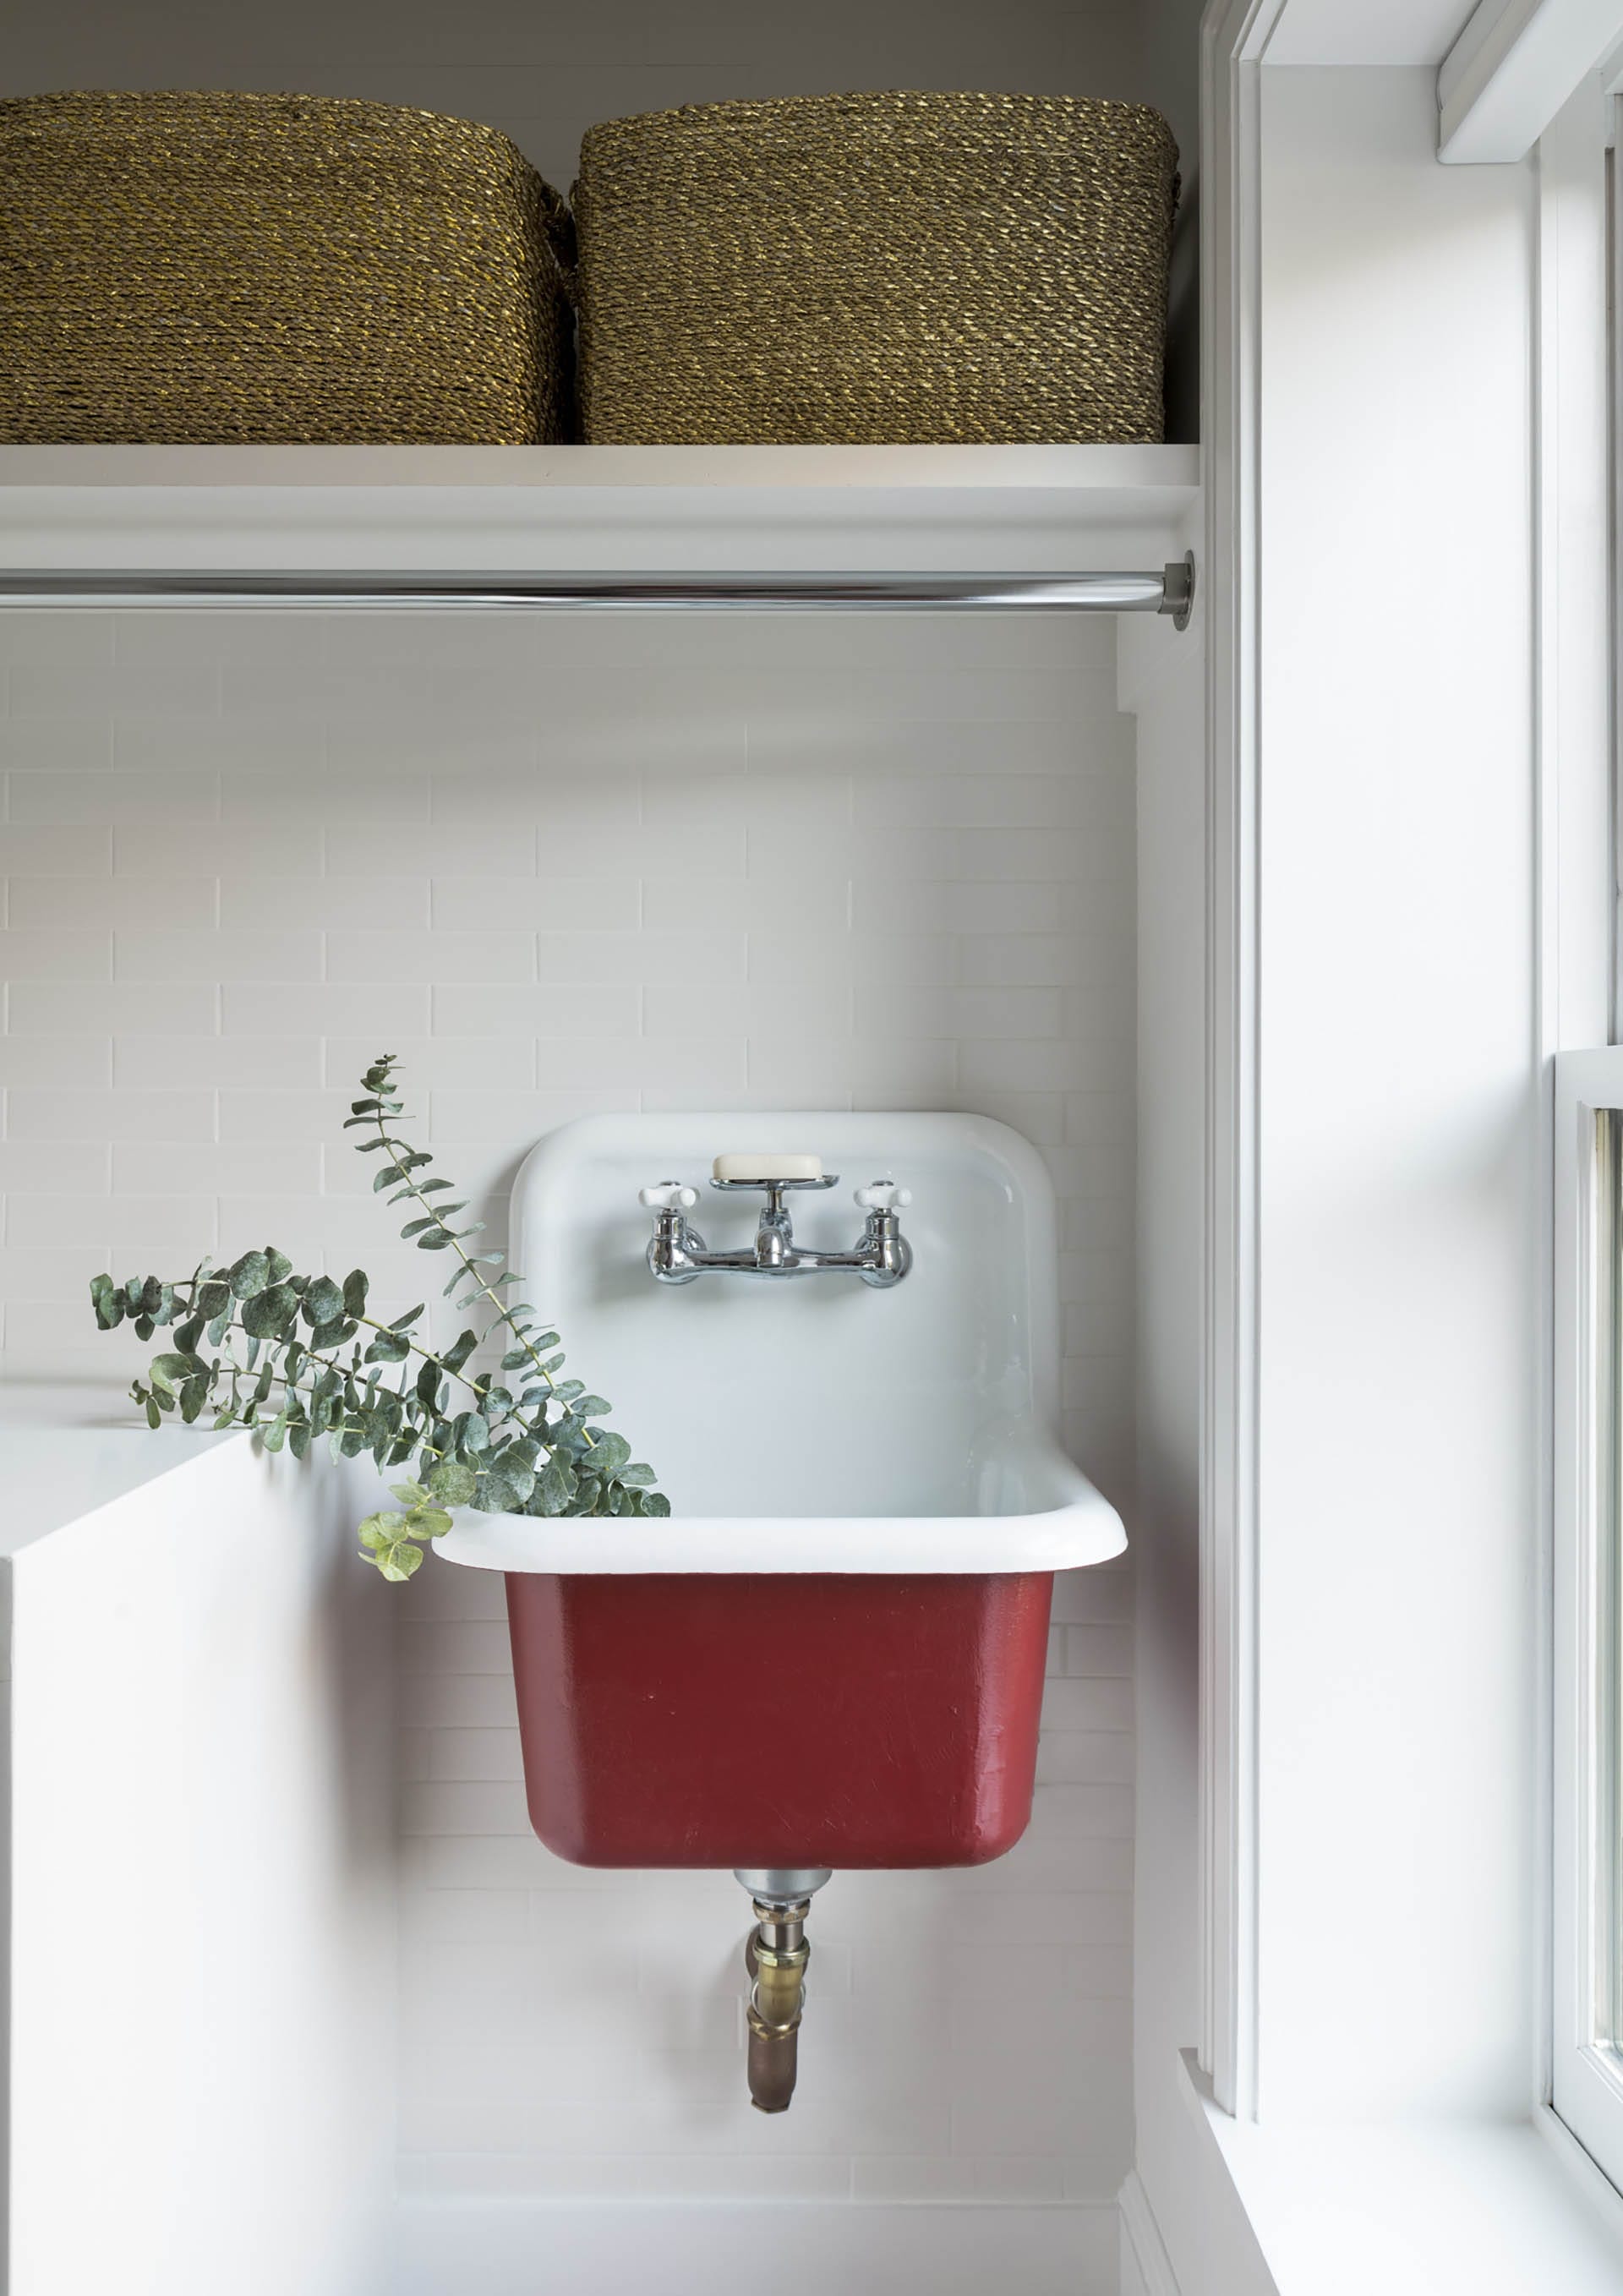 Red sink in a laundry room with white subway tiles on the wall.